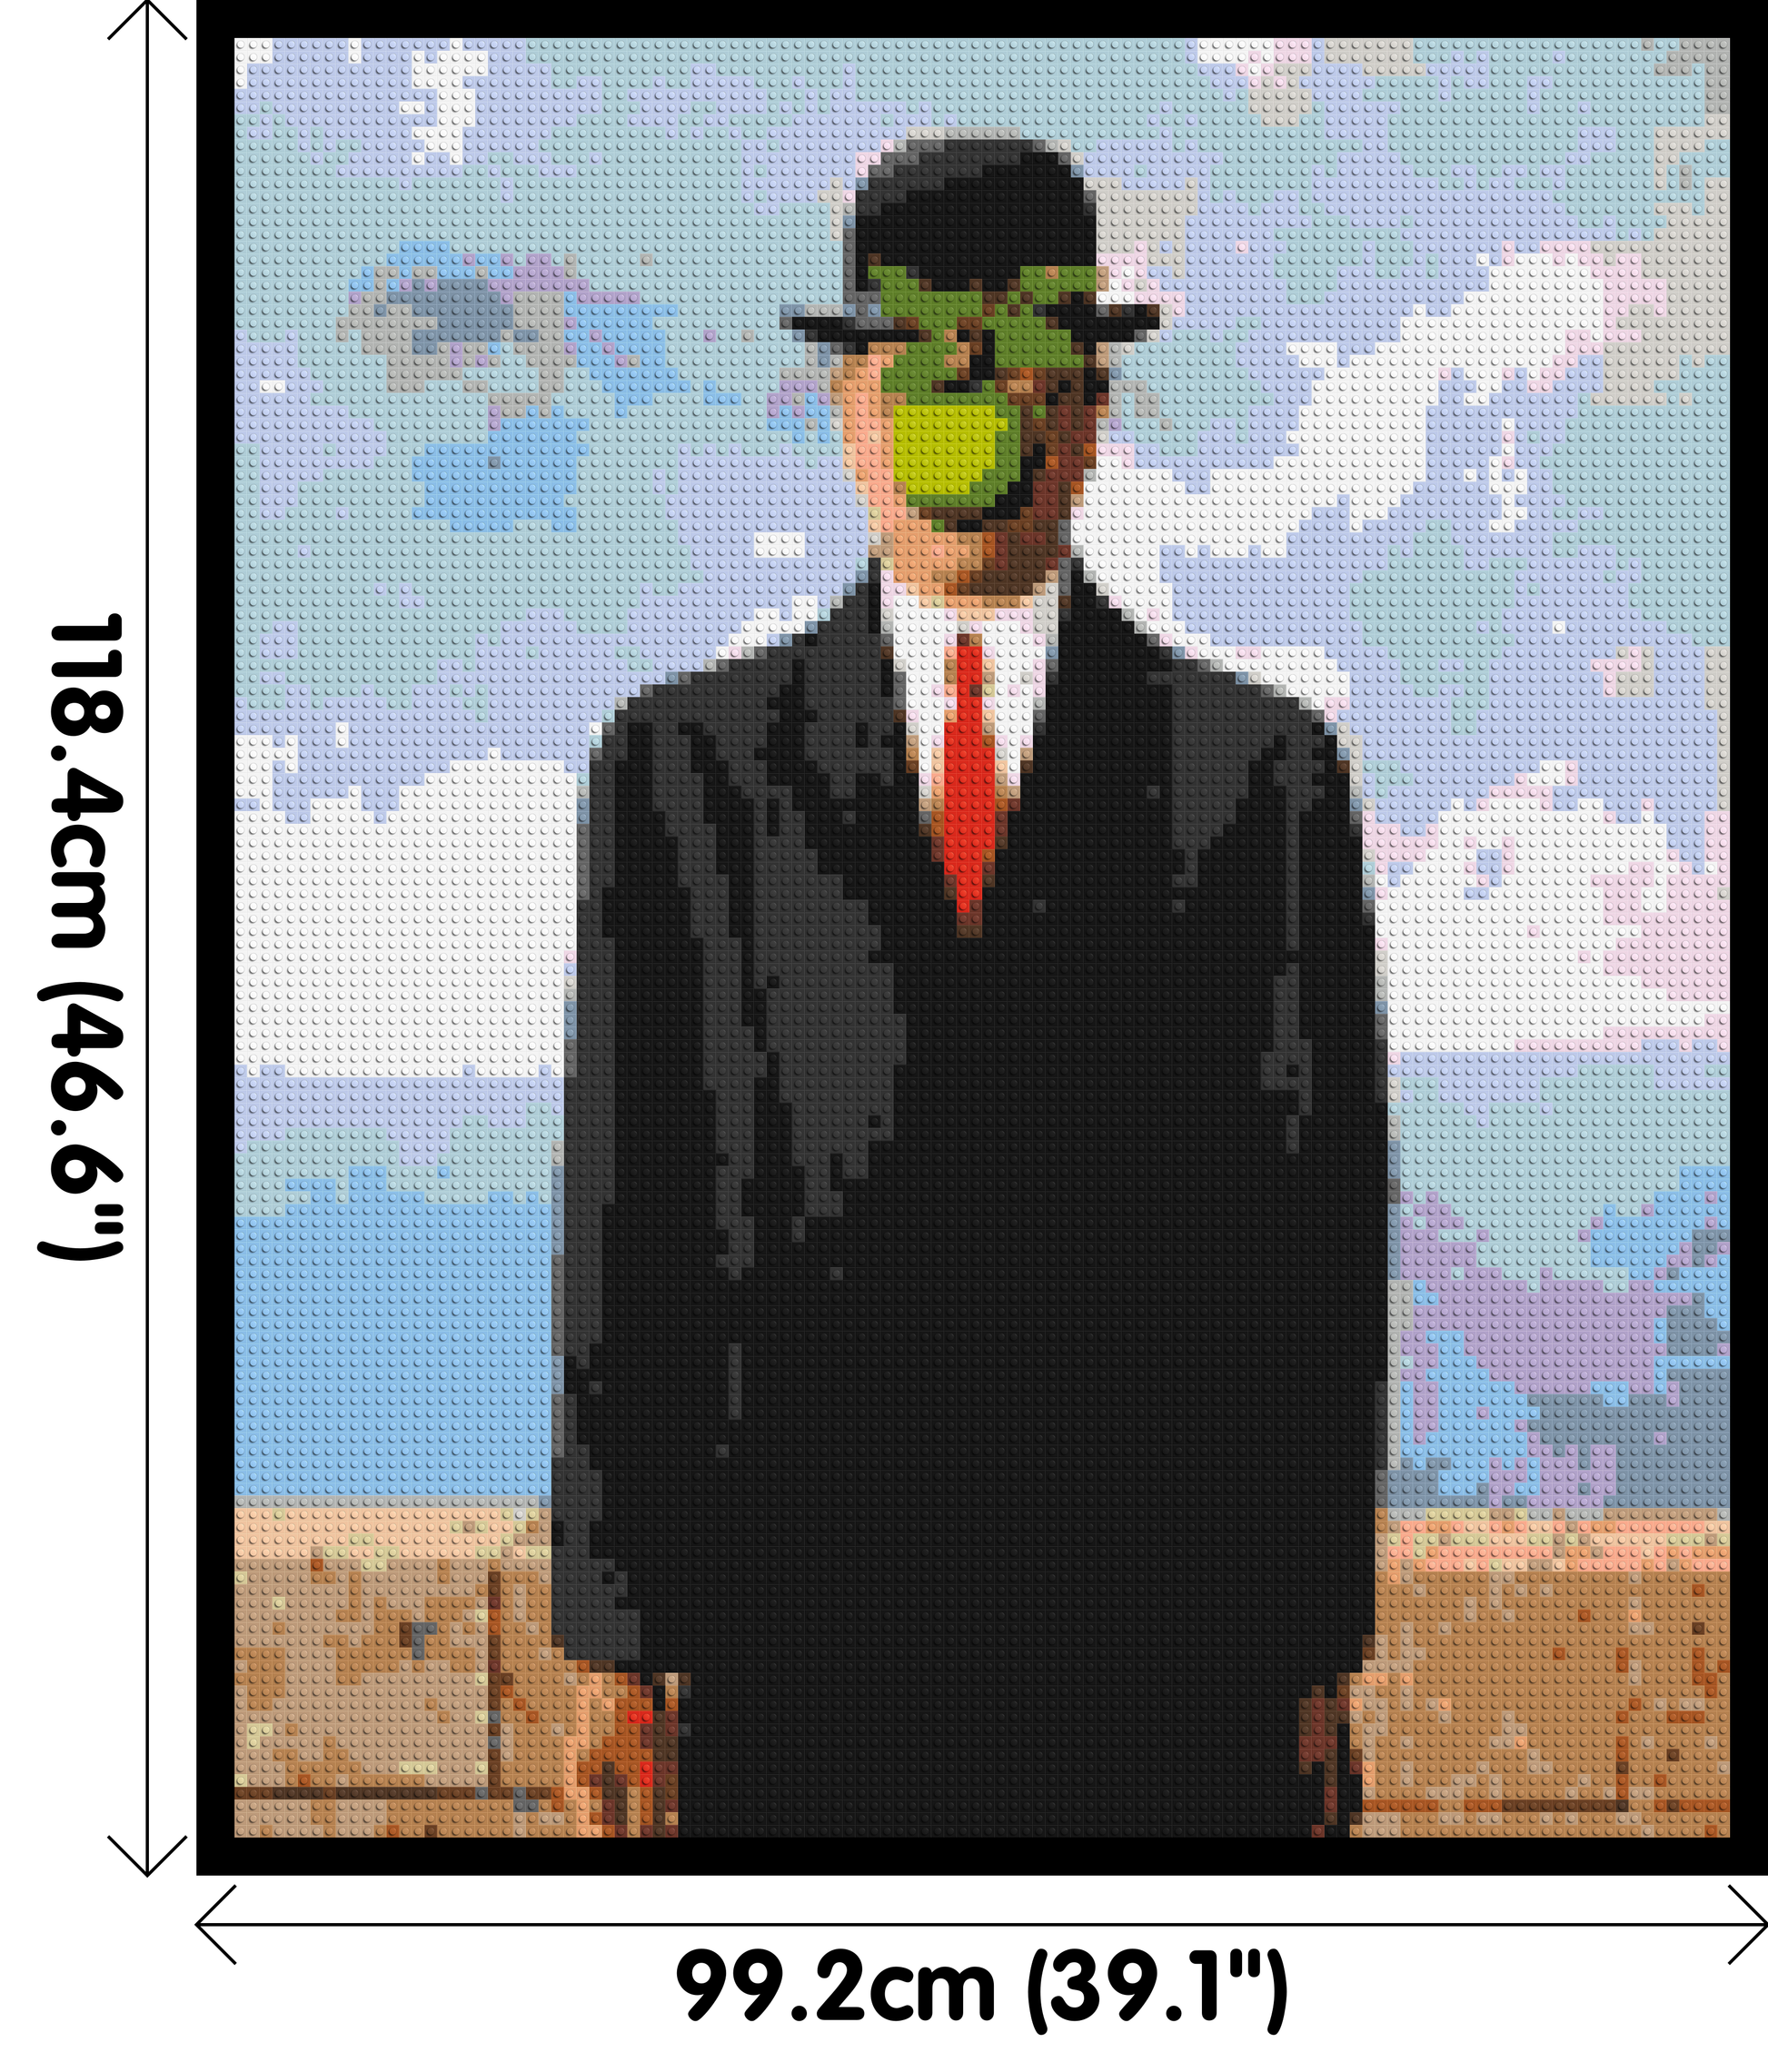 The Son of Man by René Magritte - Brick Art Mosaic Kit 5x6 dimensions with frame